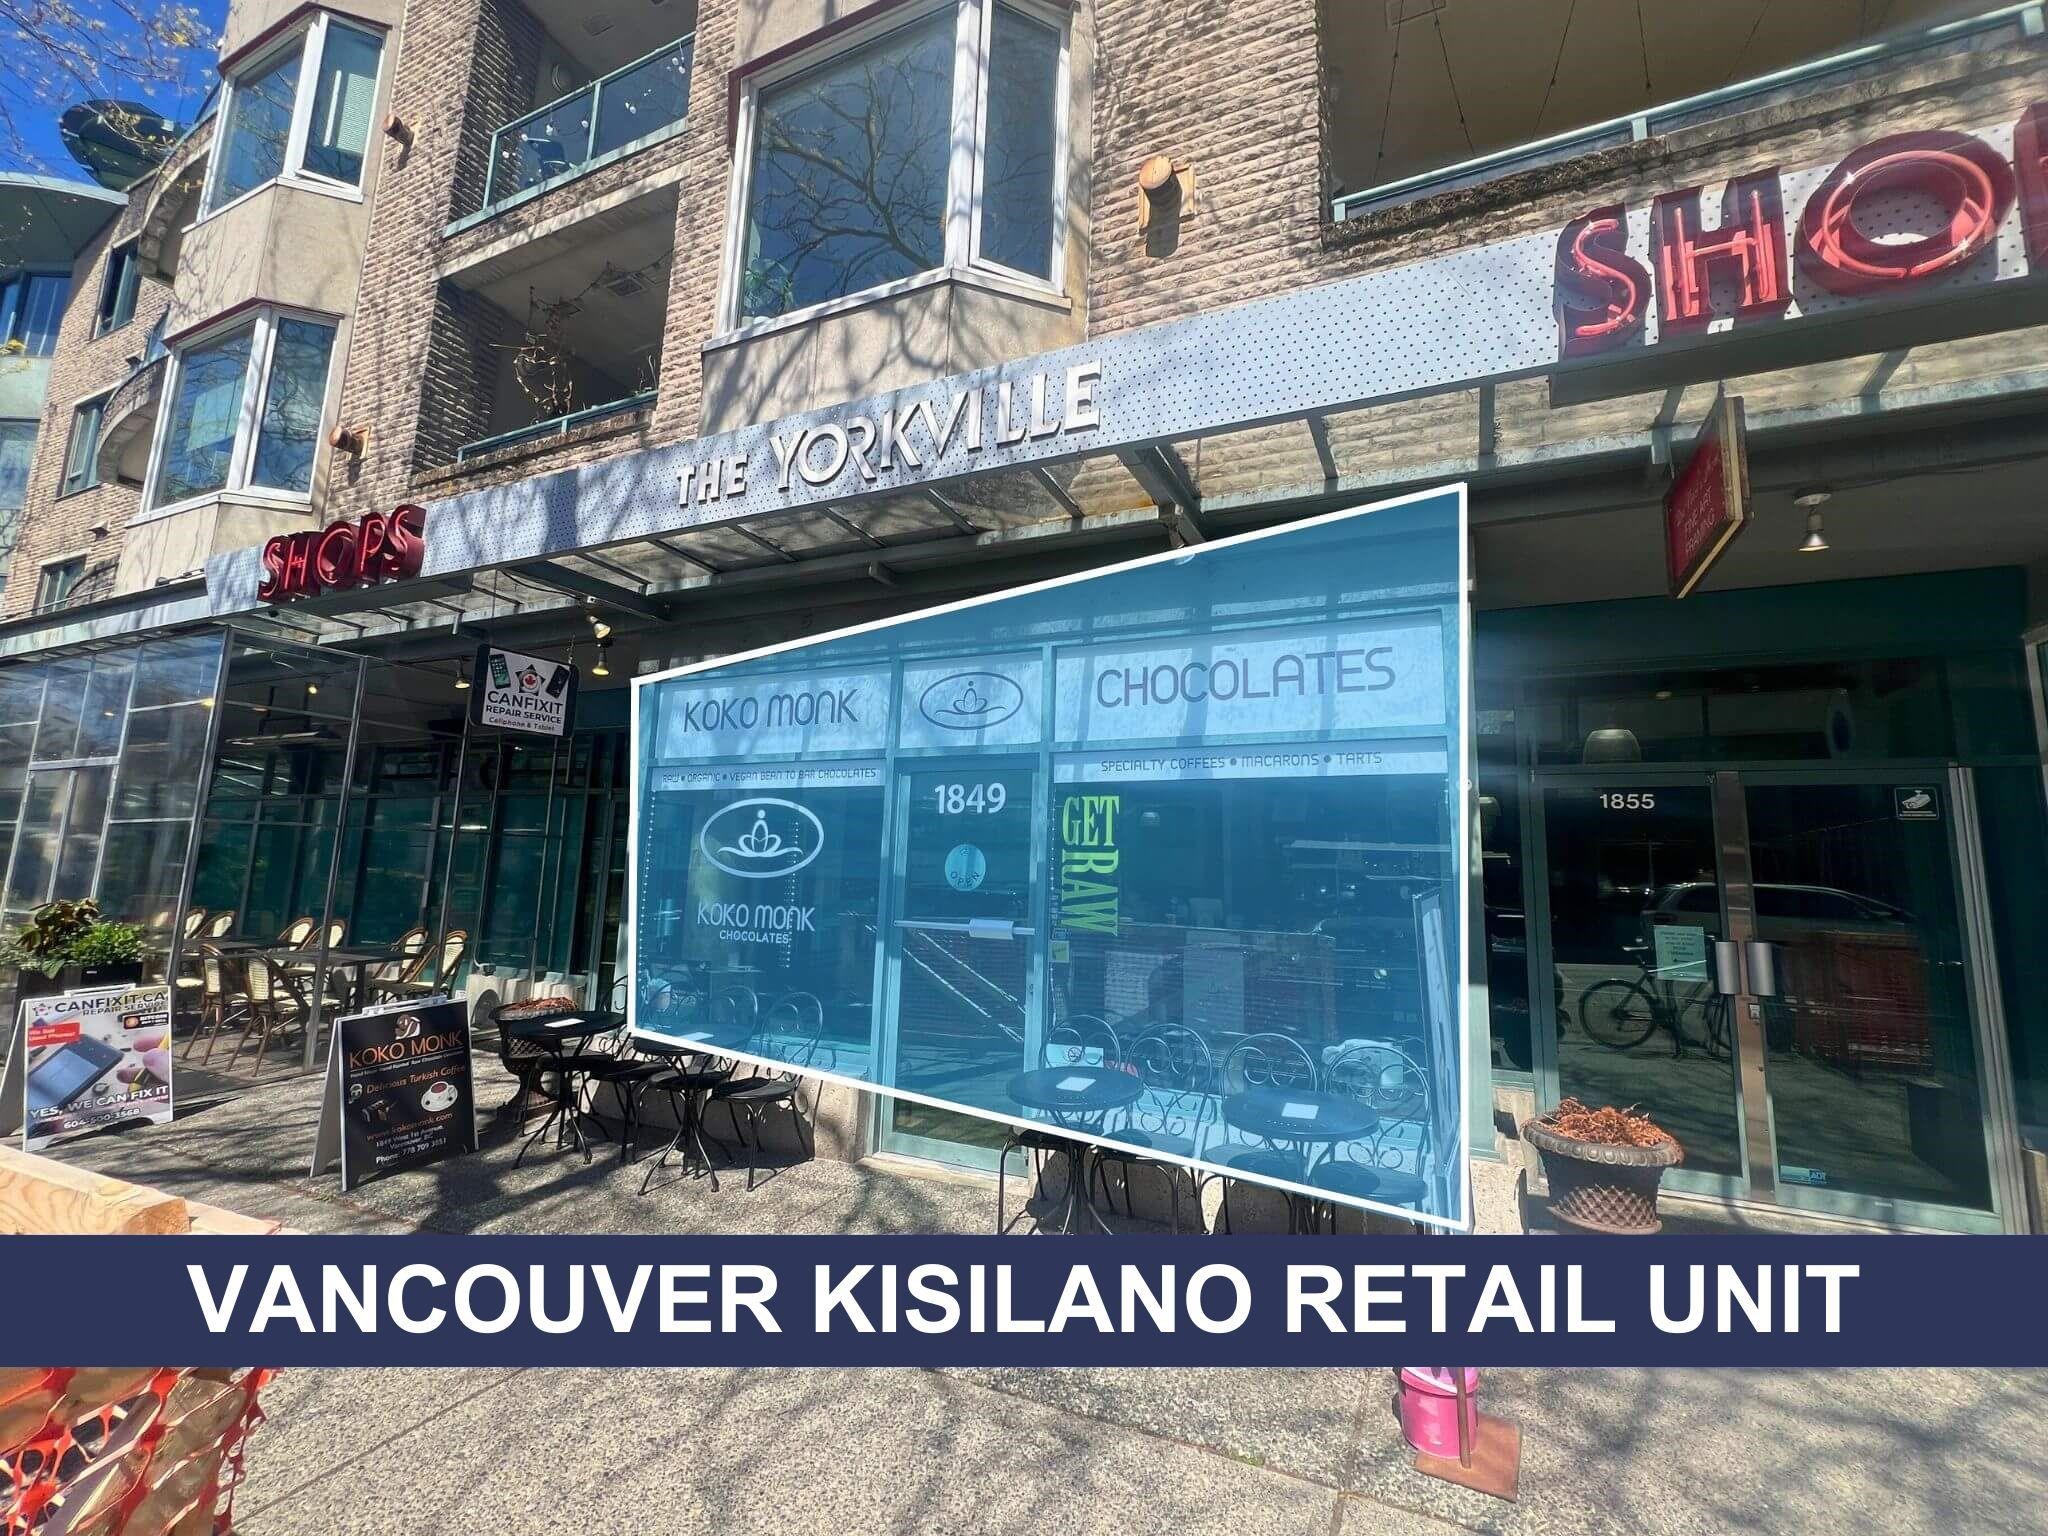 Kitsilano Land Commercial for sale:    (Listed 6800-05-14)